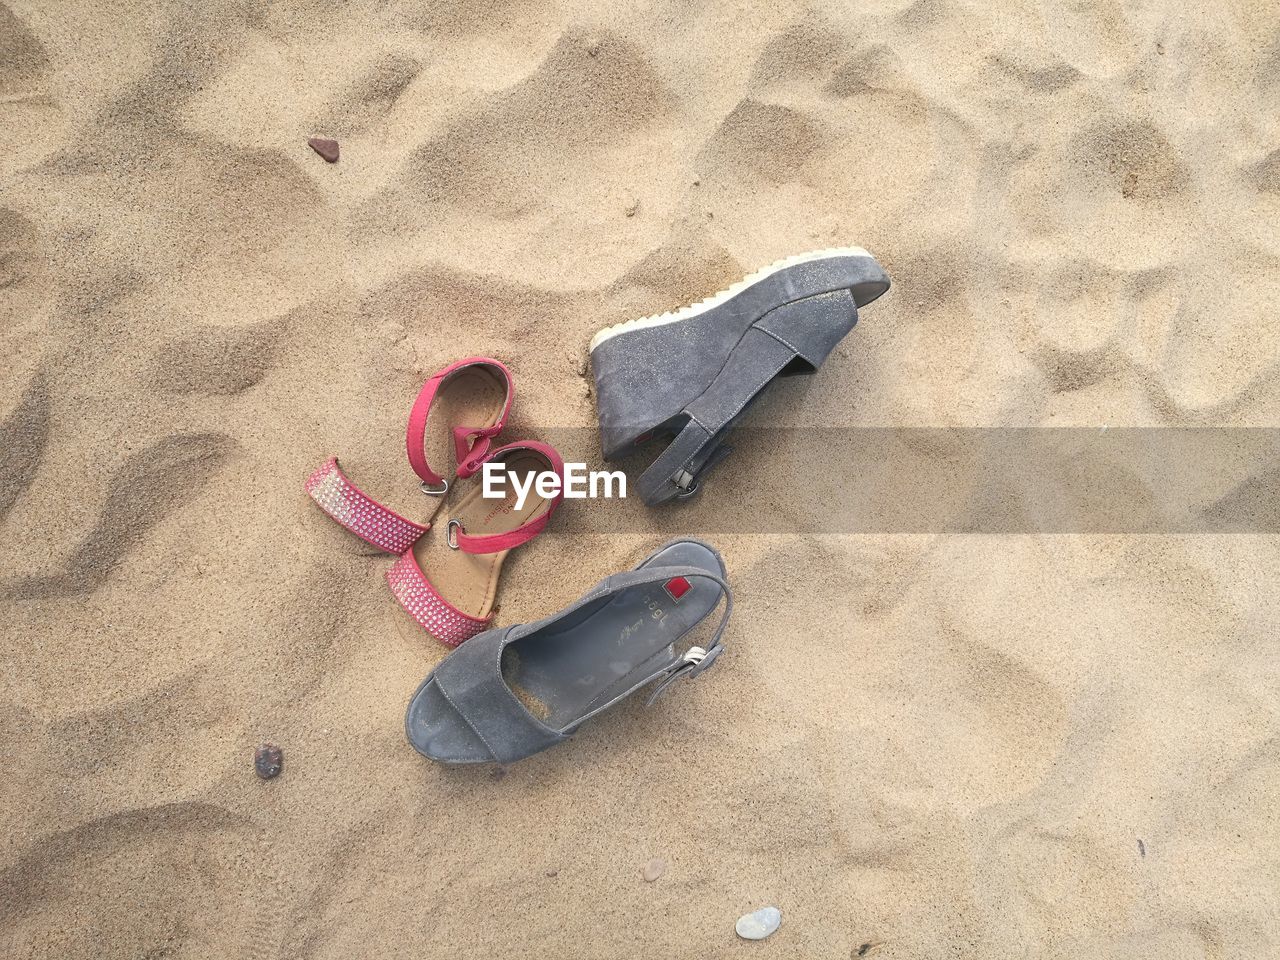 HIGH ANGLE VIEW OF SHOES ON SANDY BEACH